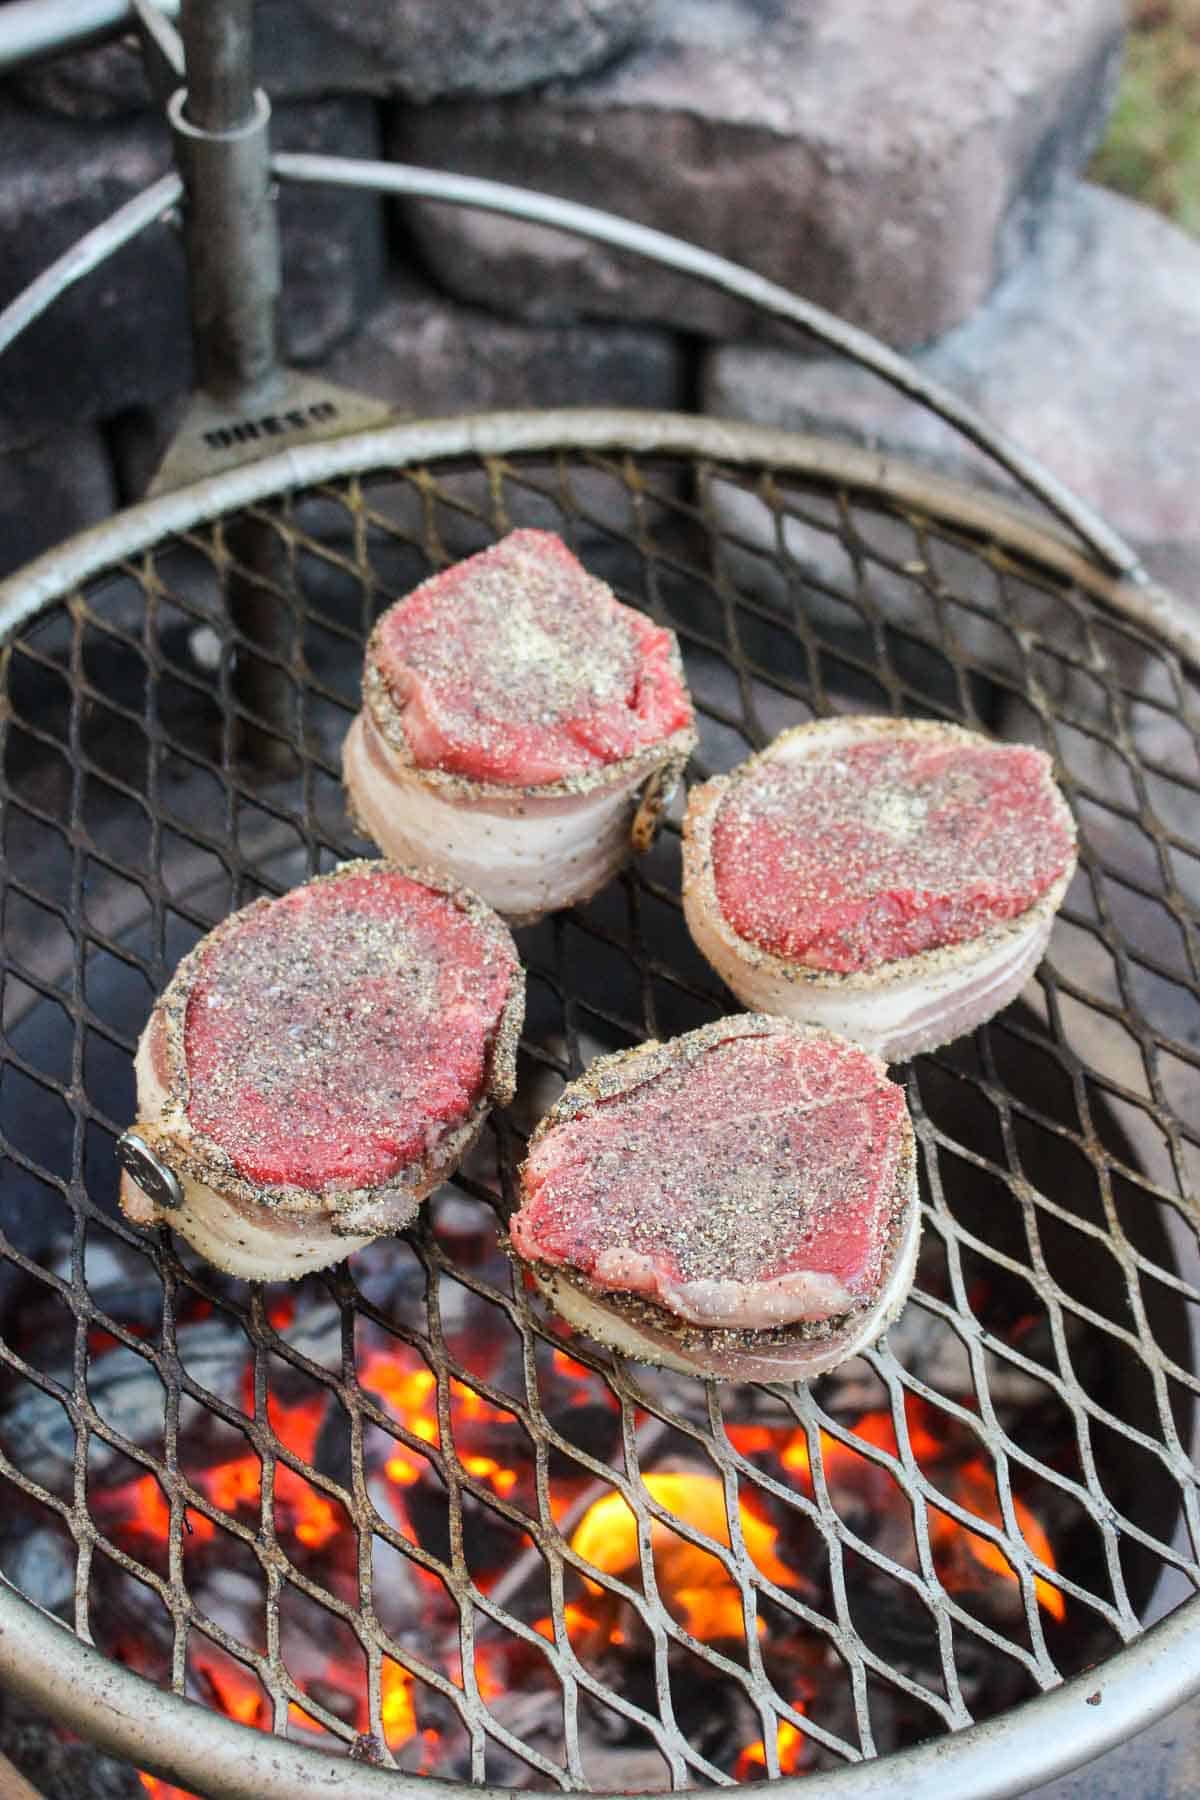 Placing the seasoned filets on the grill.